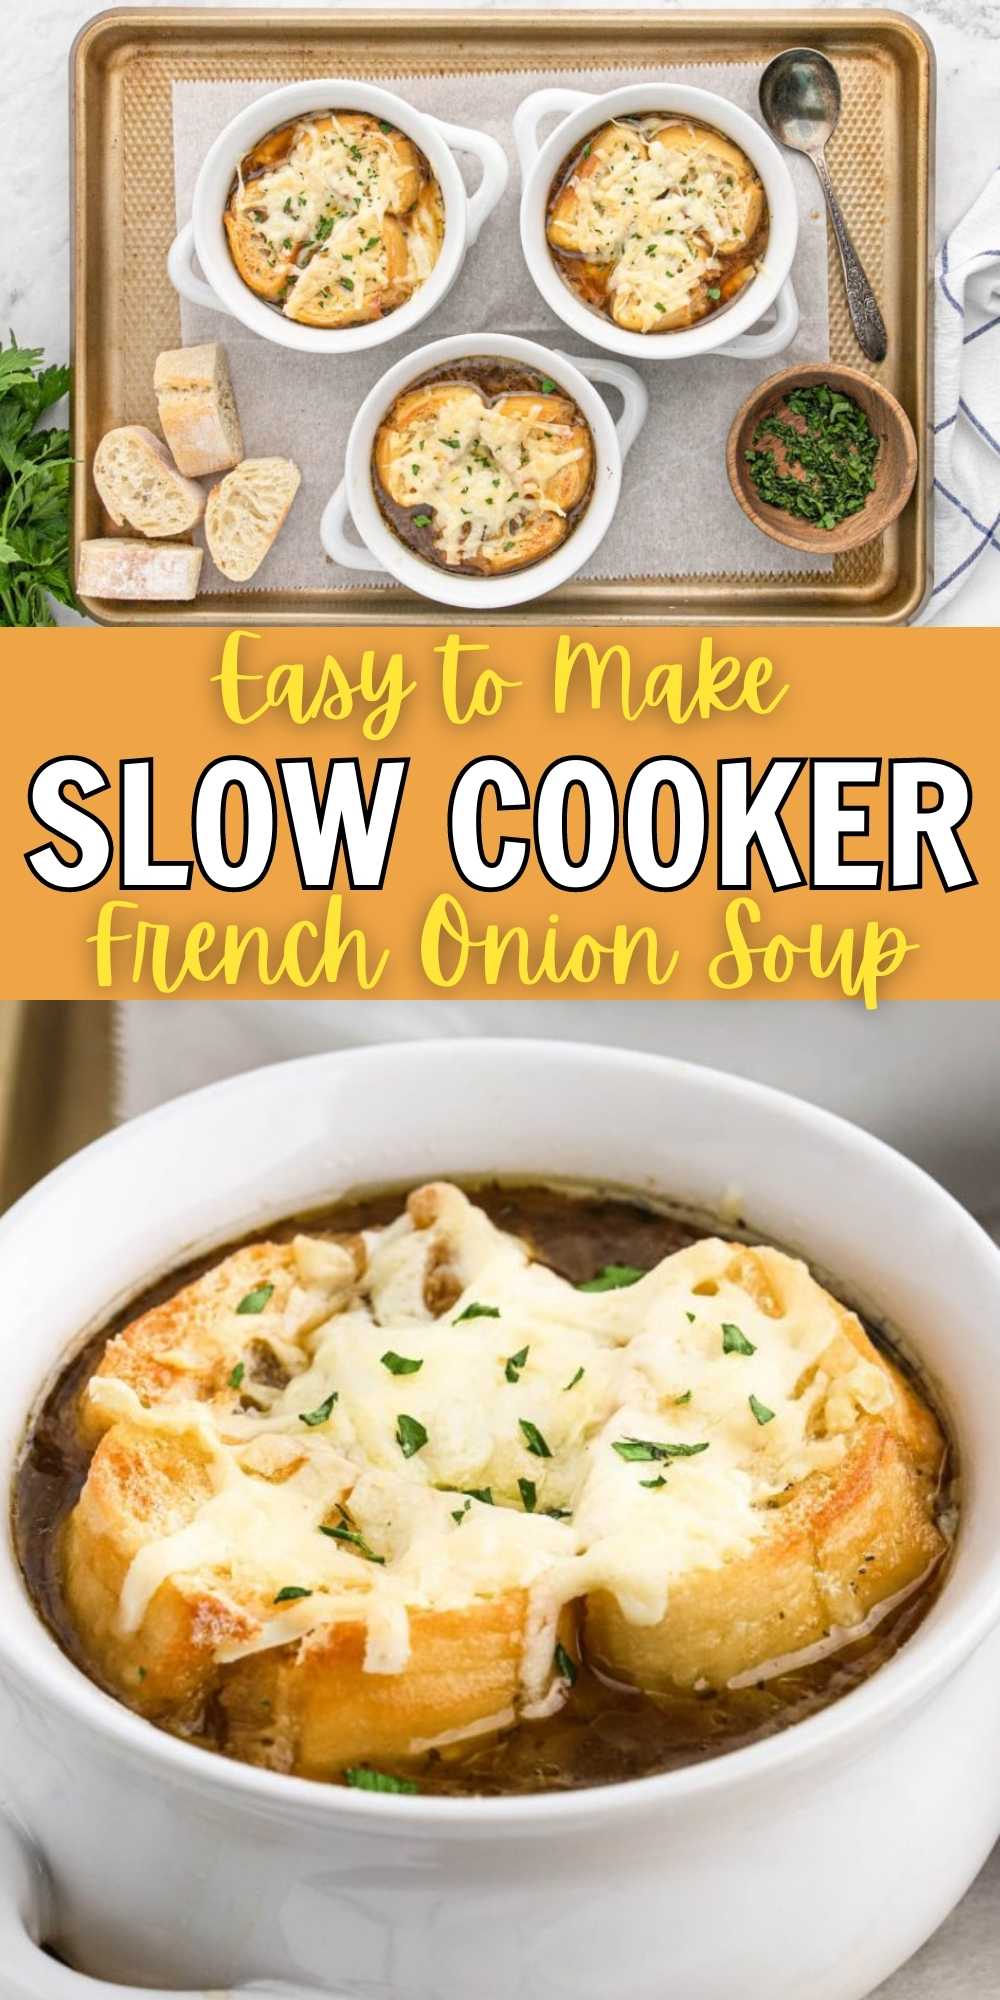 Crockpot French Onion Soup is easy to make and everyone will love the rich broth. Each bowl is topped with a cheesy baguette slice. We love that the slow cooker does all the work to create one of my favorite soup recipes. Serve with a side salad or roasted vegetable for a delicious meal idea. #eatingonadime #slowcookerfrenchonionsoup #frenchonionsoup